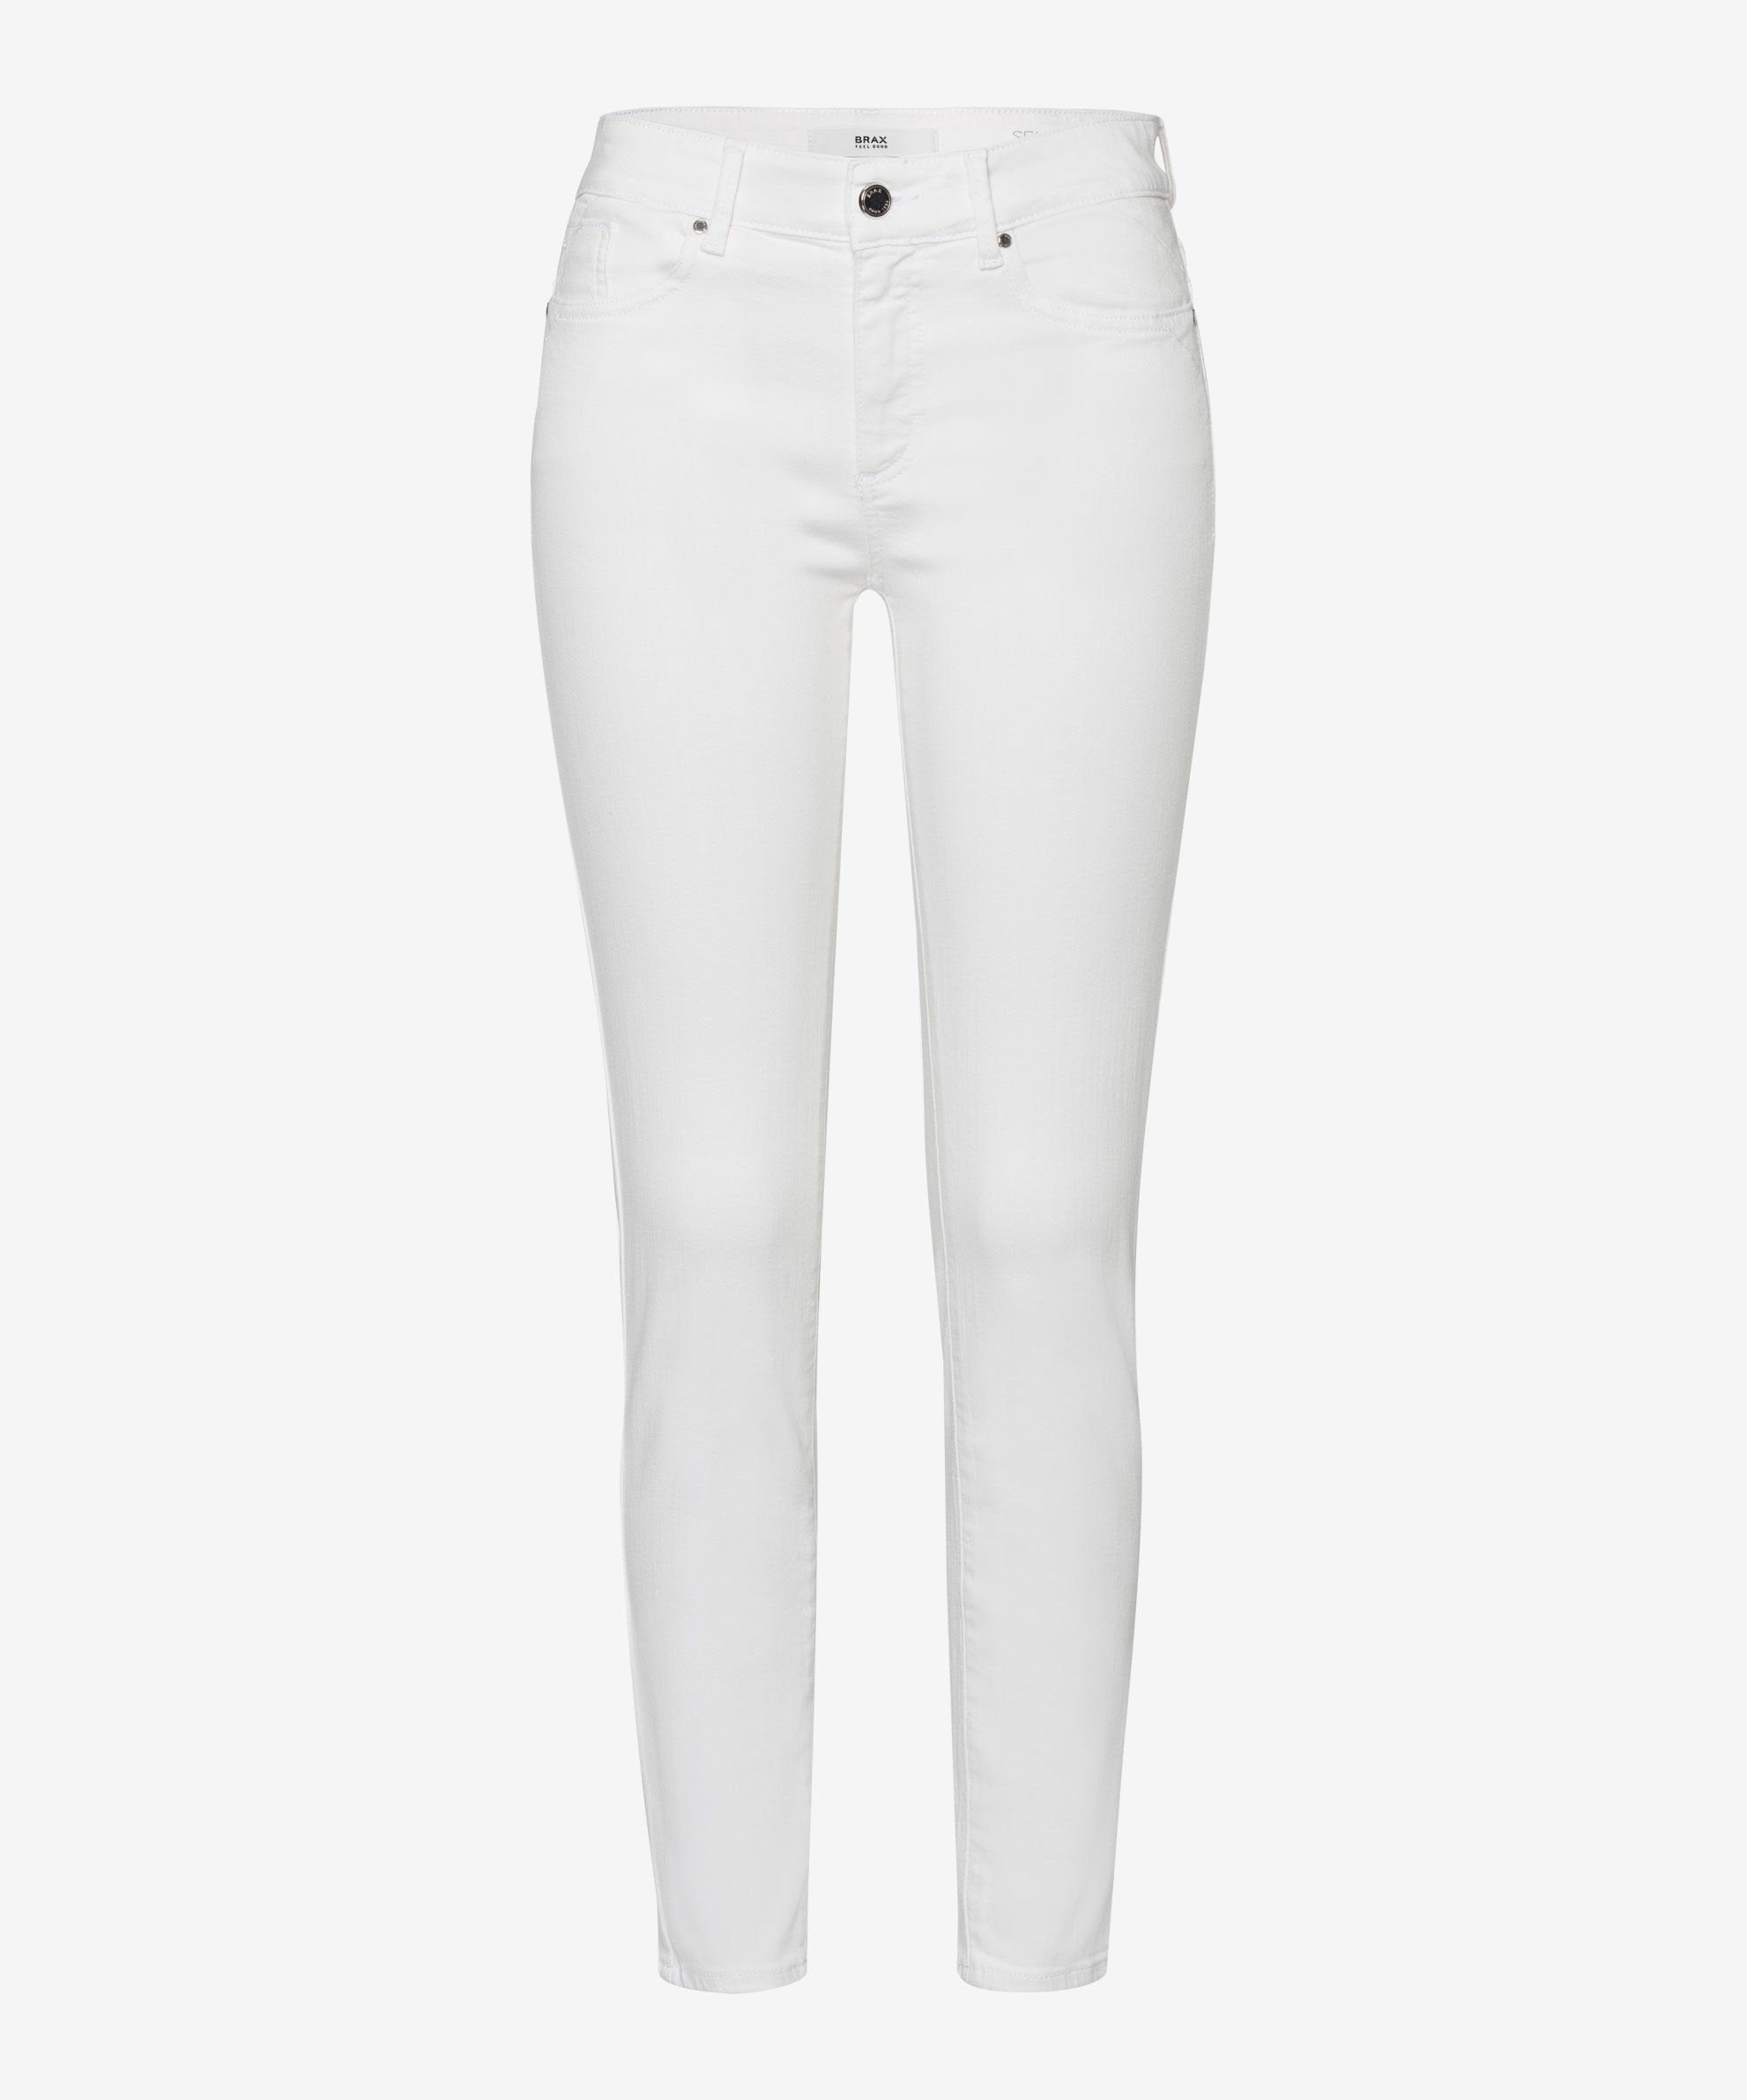 Brax Skinny-fit-Jeans Röhrenjeans in Thermo-Qualität offwhite